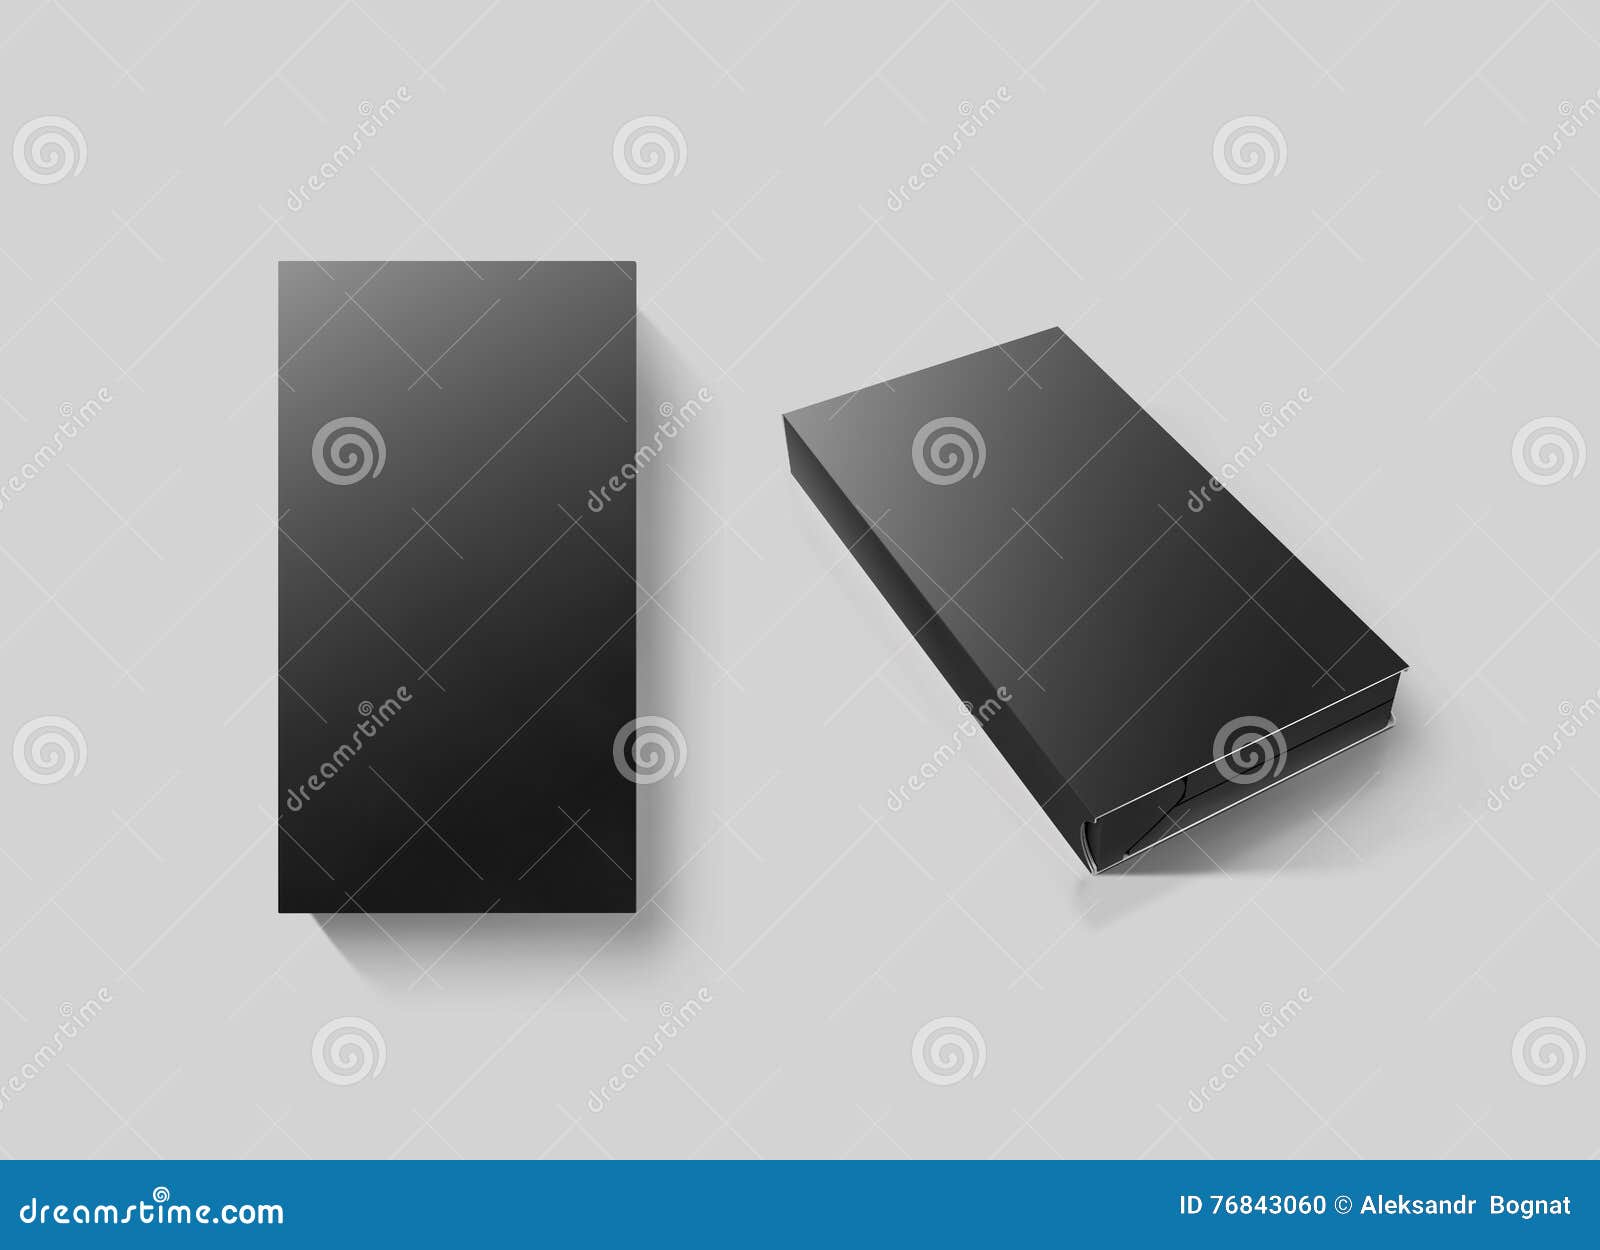 Download Blank Black Video Cassette Tape Box Mockup Set, Isolated ...